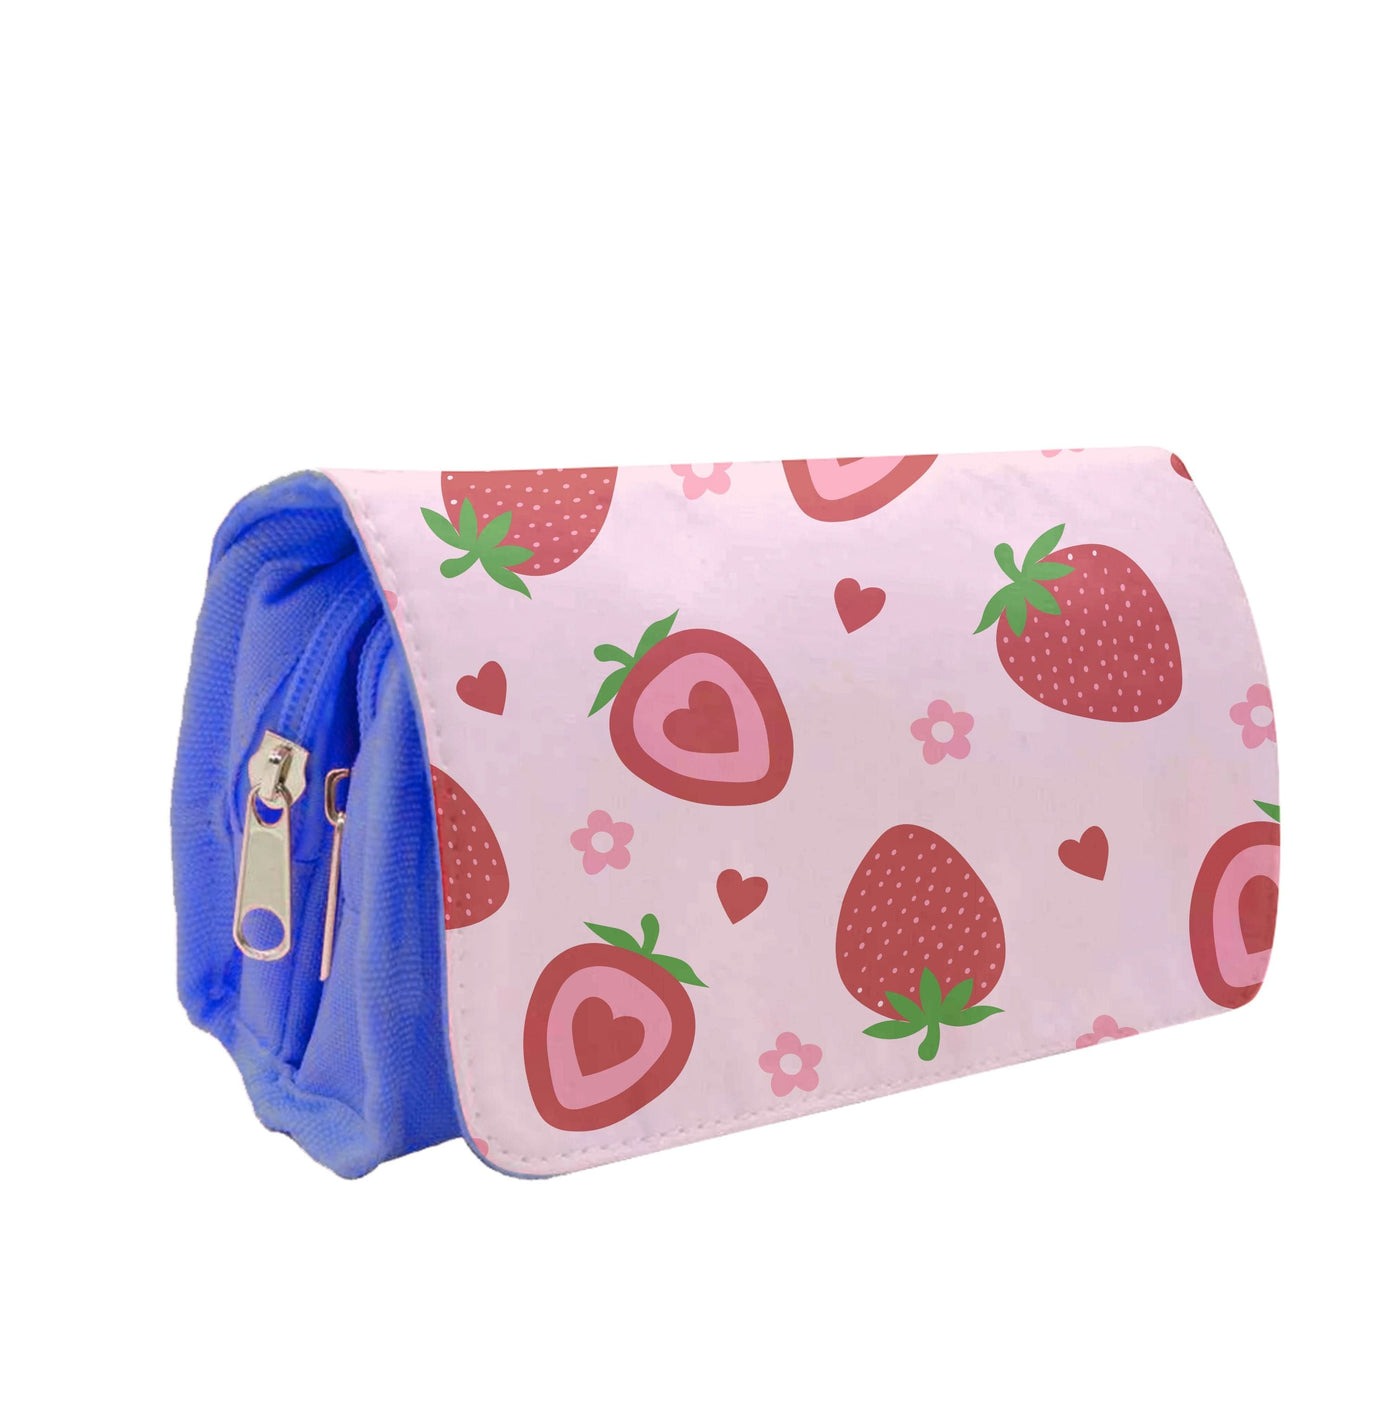 Strawberries And Hearts - Fruit Patterns Pencil Case